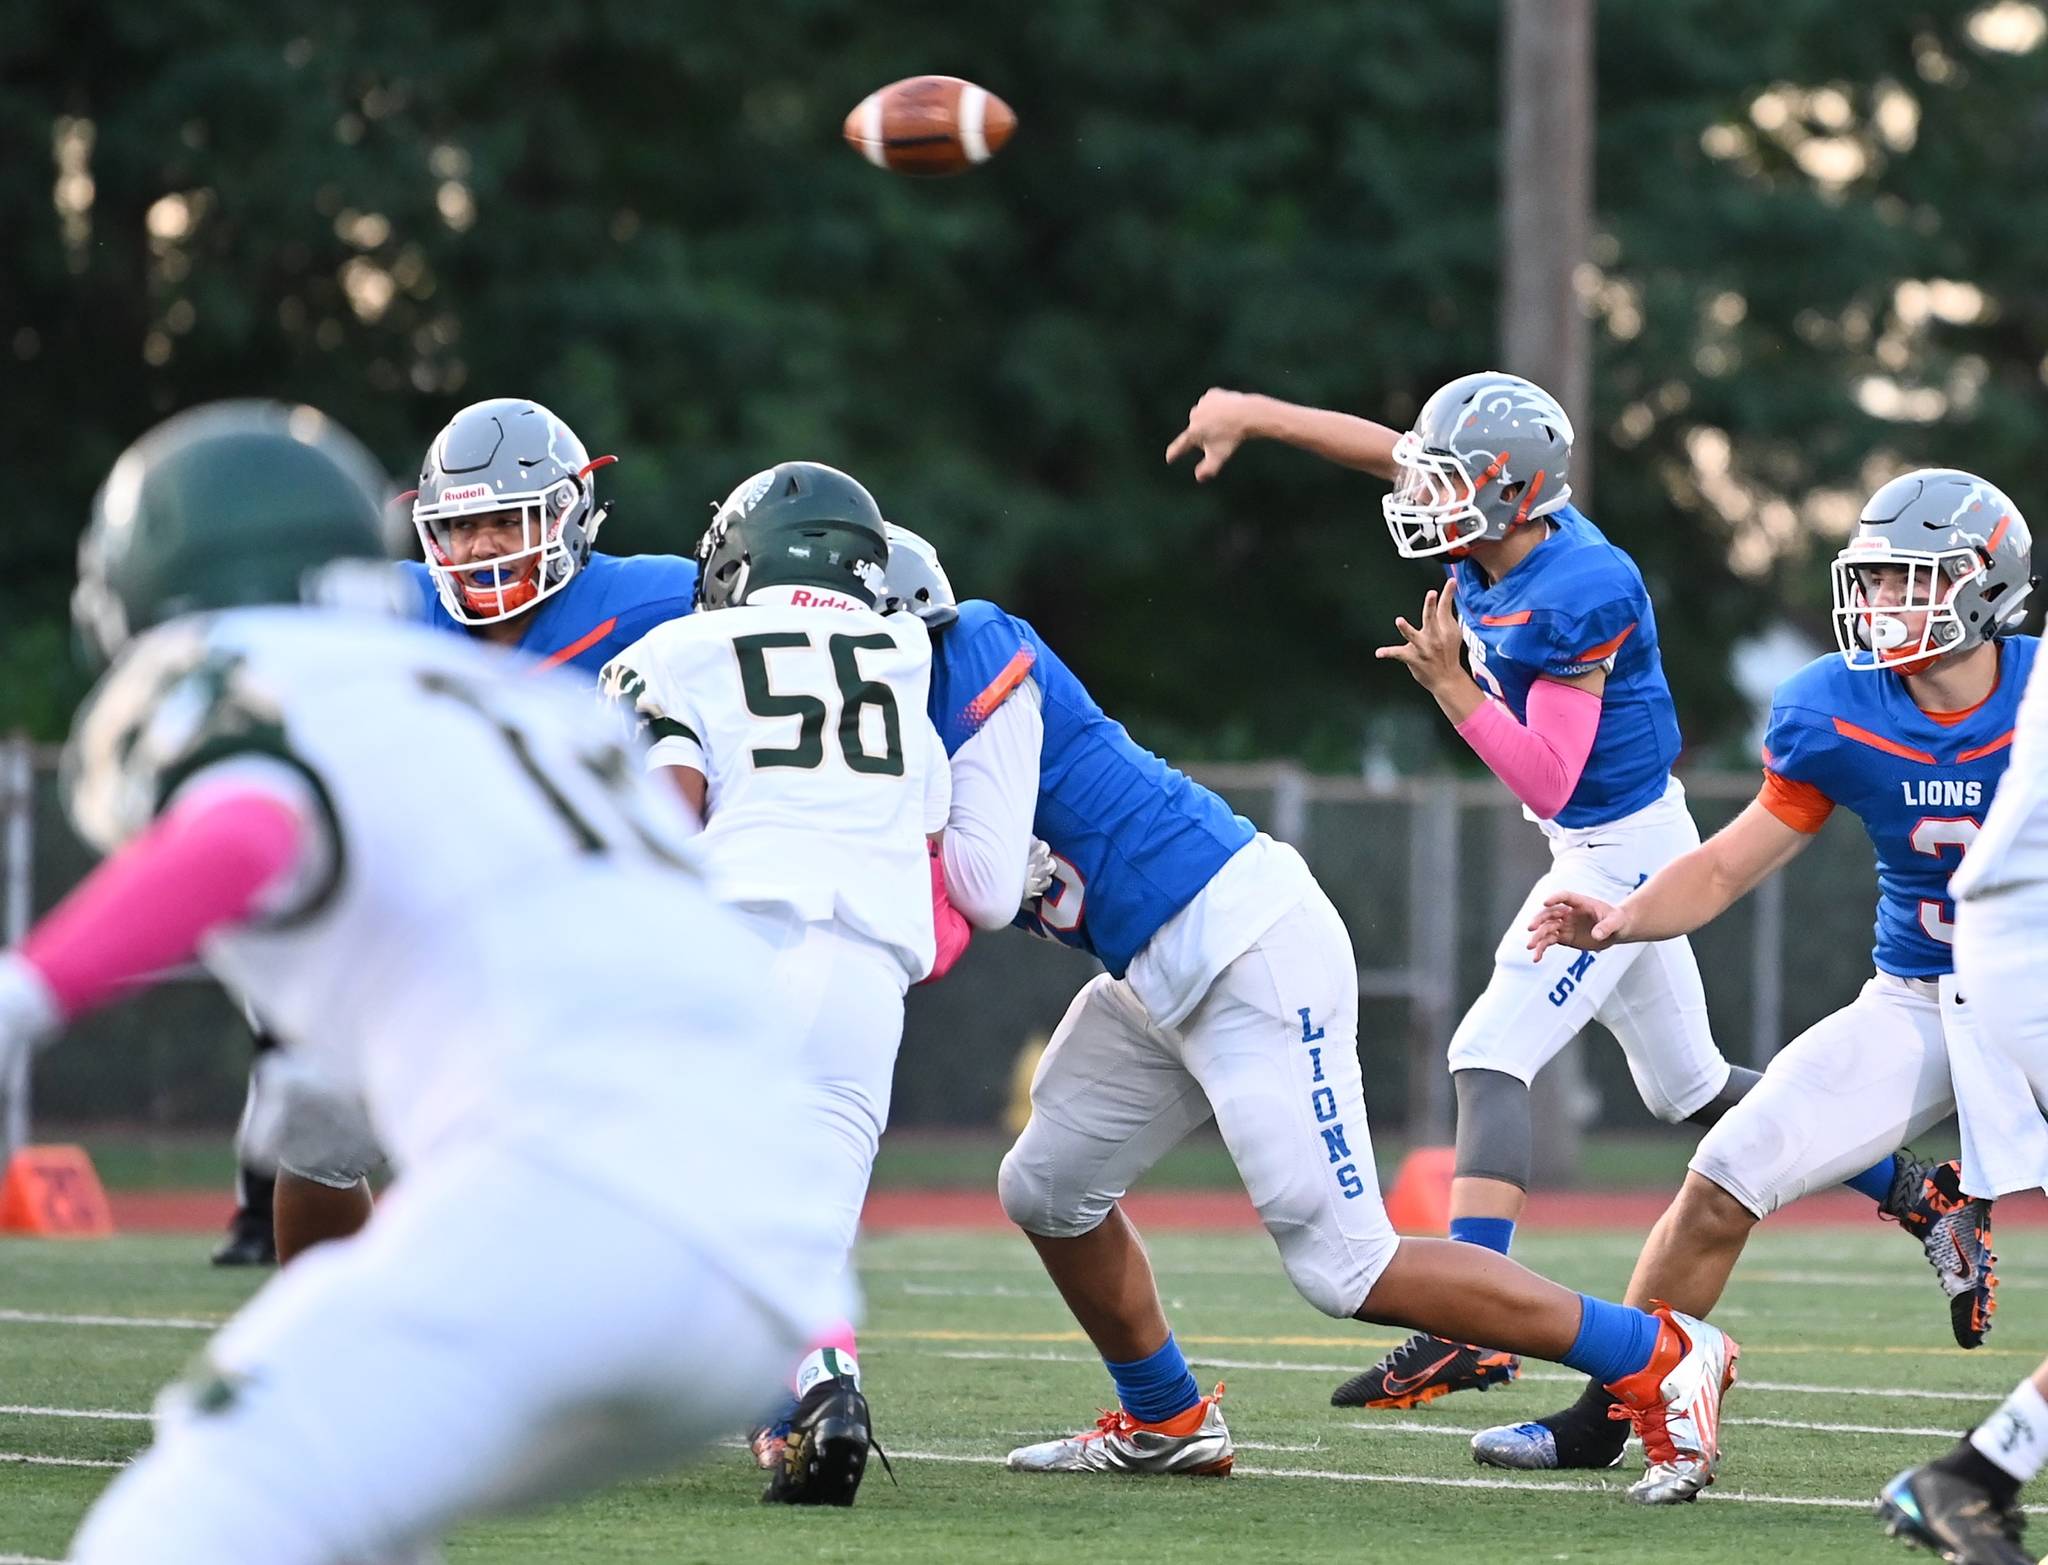 Auburn Mountainview quarterback Kayde Bodine delivers a quick toss to a receiver during the first half of their North Puget Sound League game against Auburn on Friday night. Bodine threw five touchdowns in the Lions’ win. RACHEL CIAMPI, Auburn Reporter